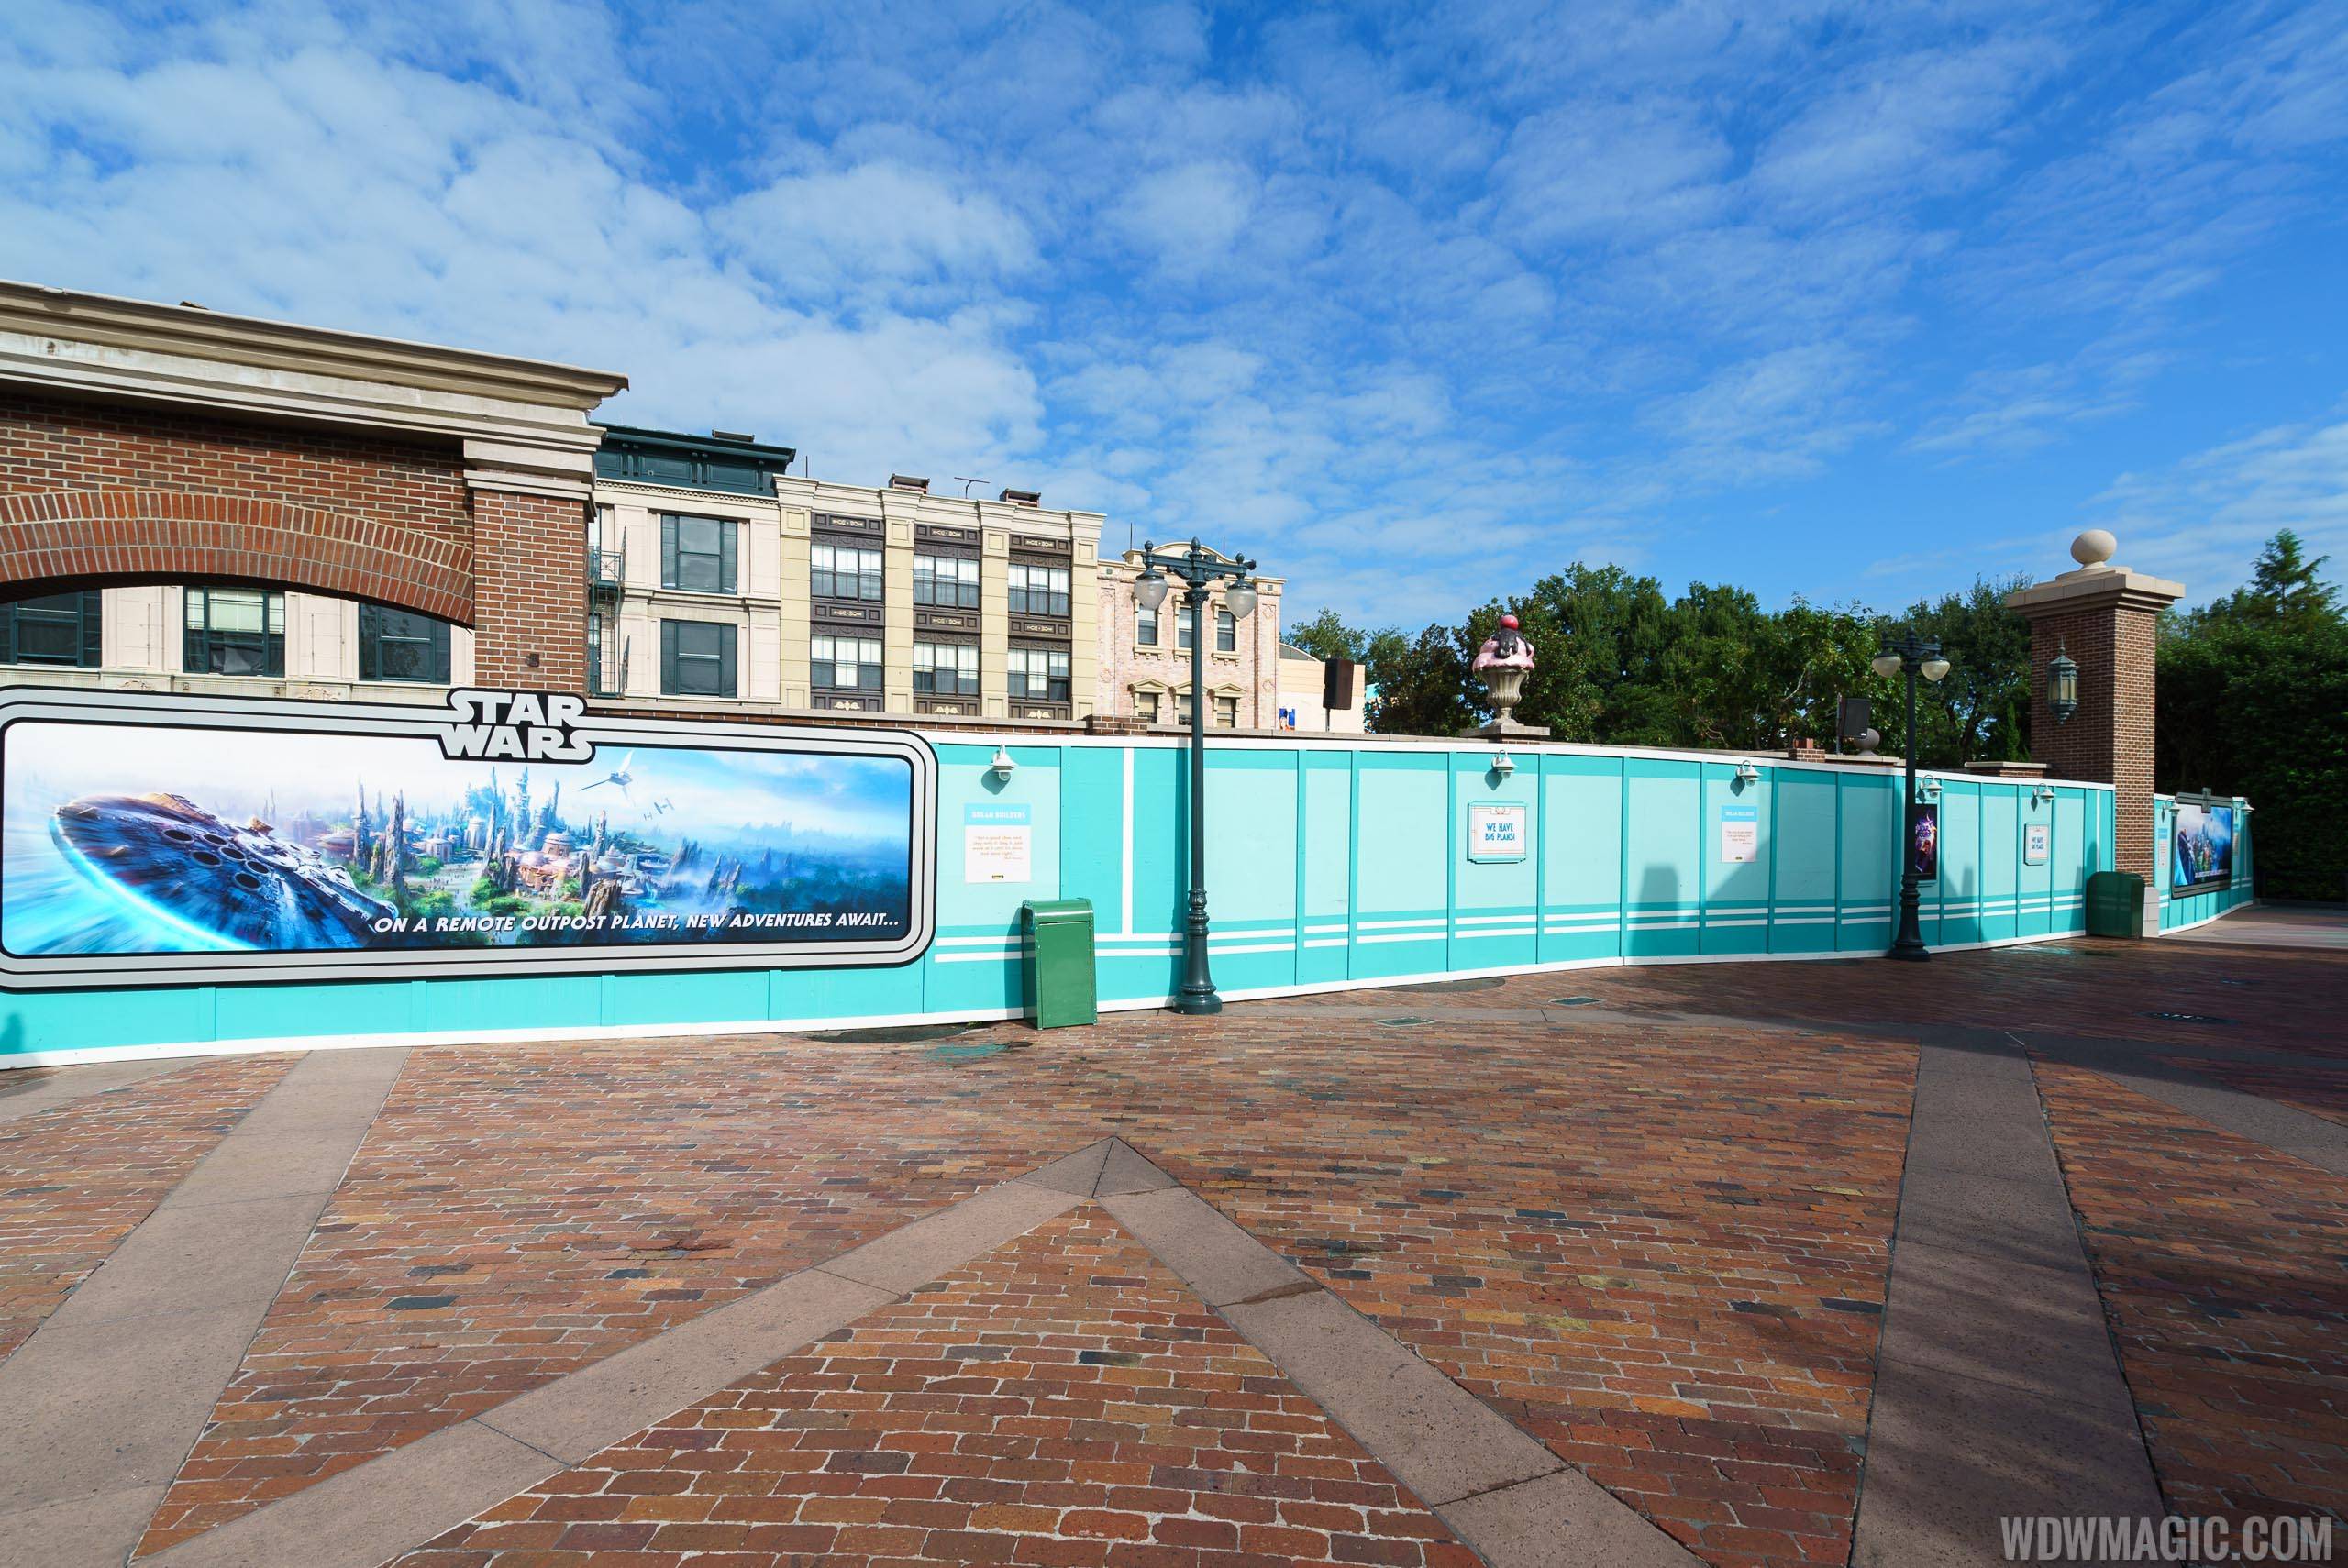 PHOTOS - Cleared backlot changes the skyline at Disney's Hollywood Studios